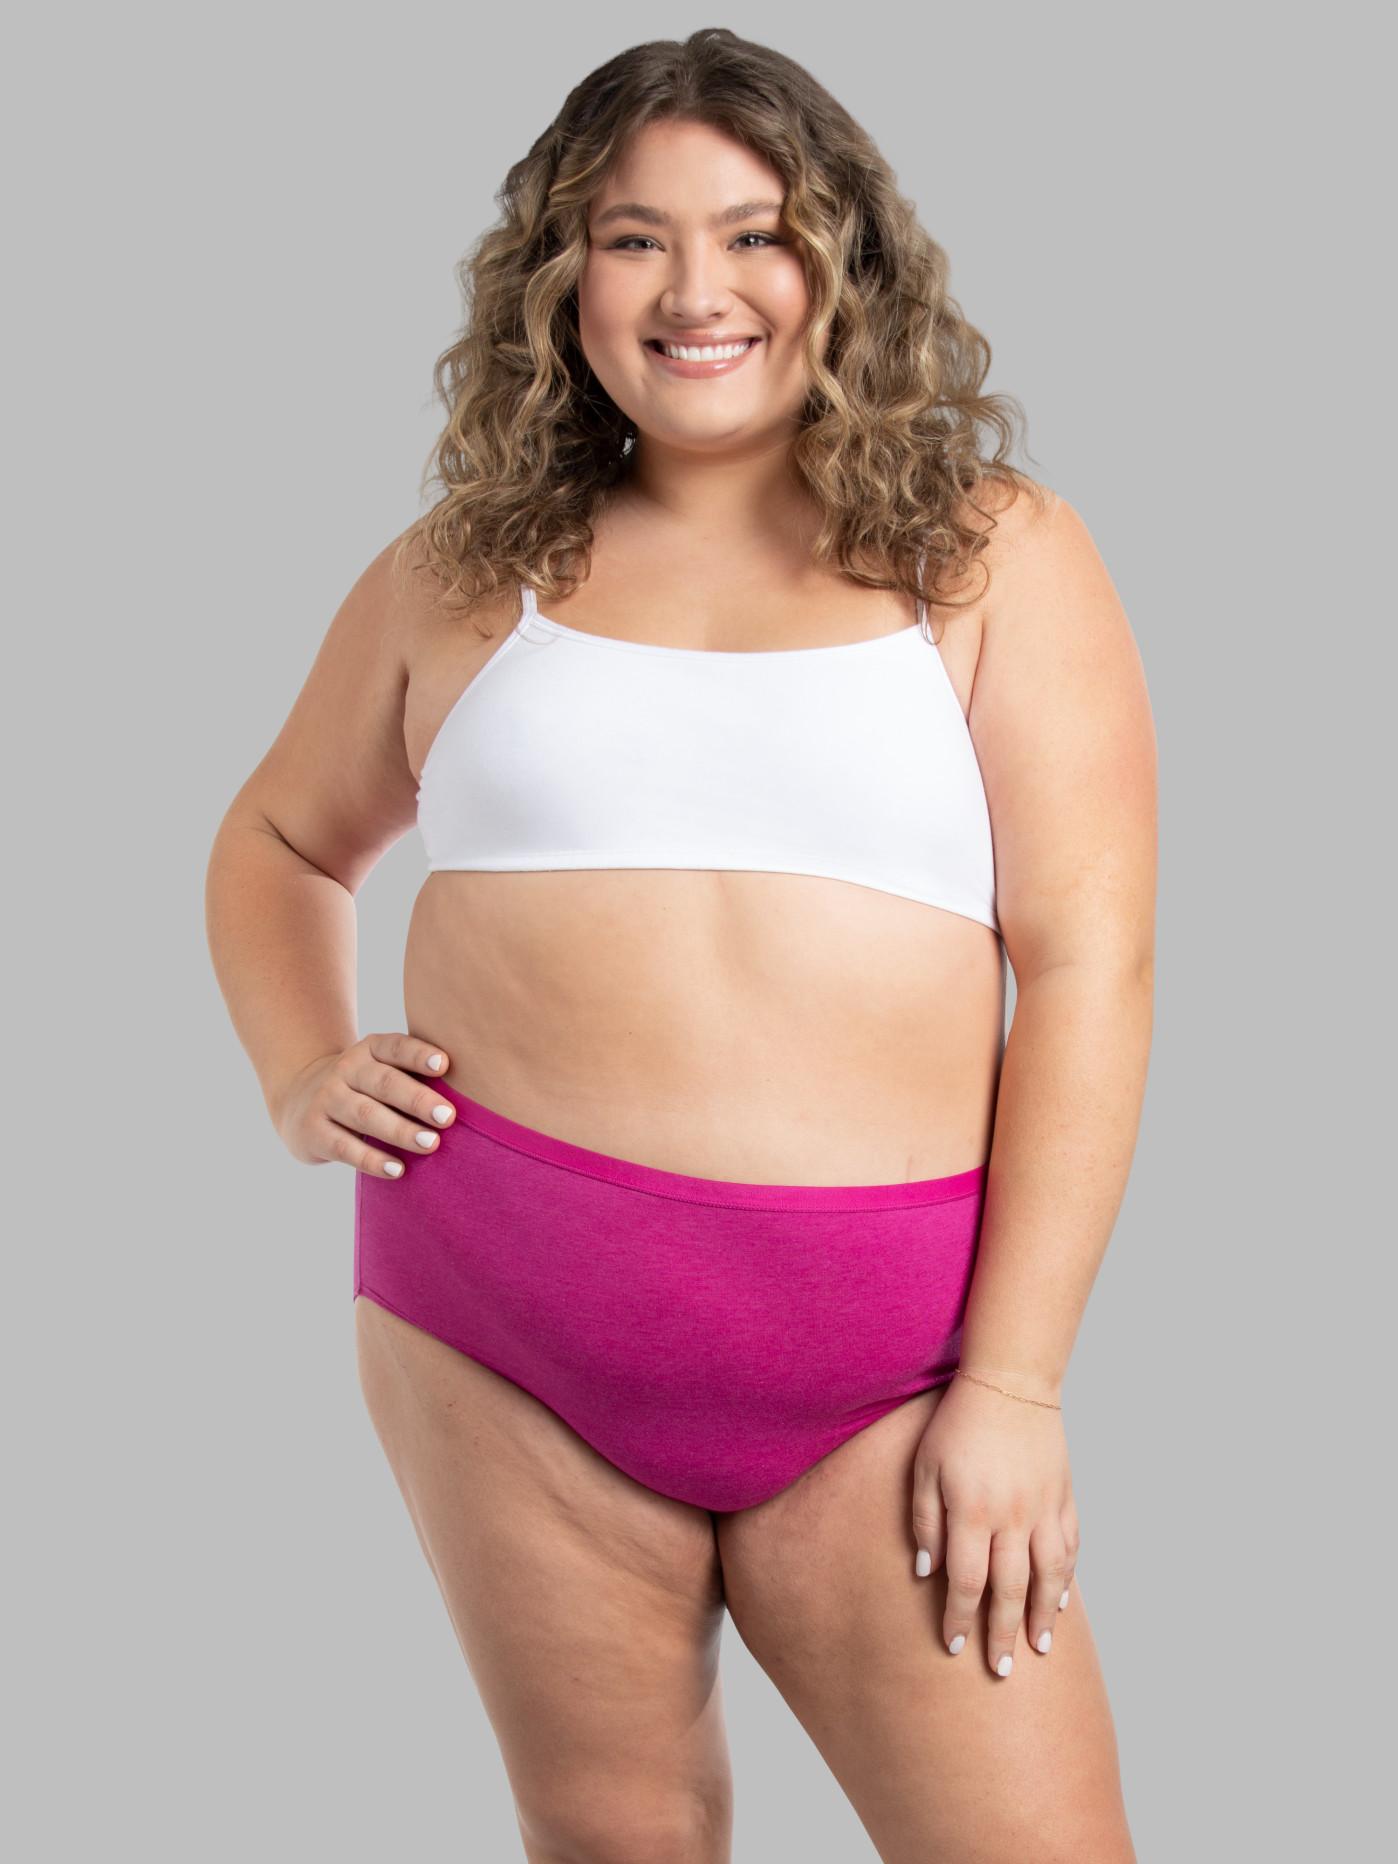 Fruit of the Loom Women's Seamless Underwear (Regular & Plus Size), Hi Cut-8  Pack-Assorted Colors, 10 at  Women's Clothing store